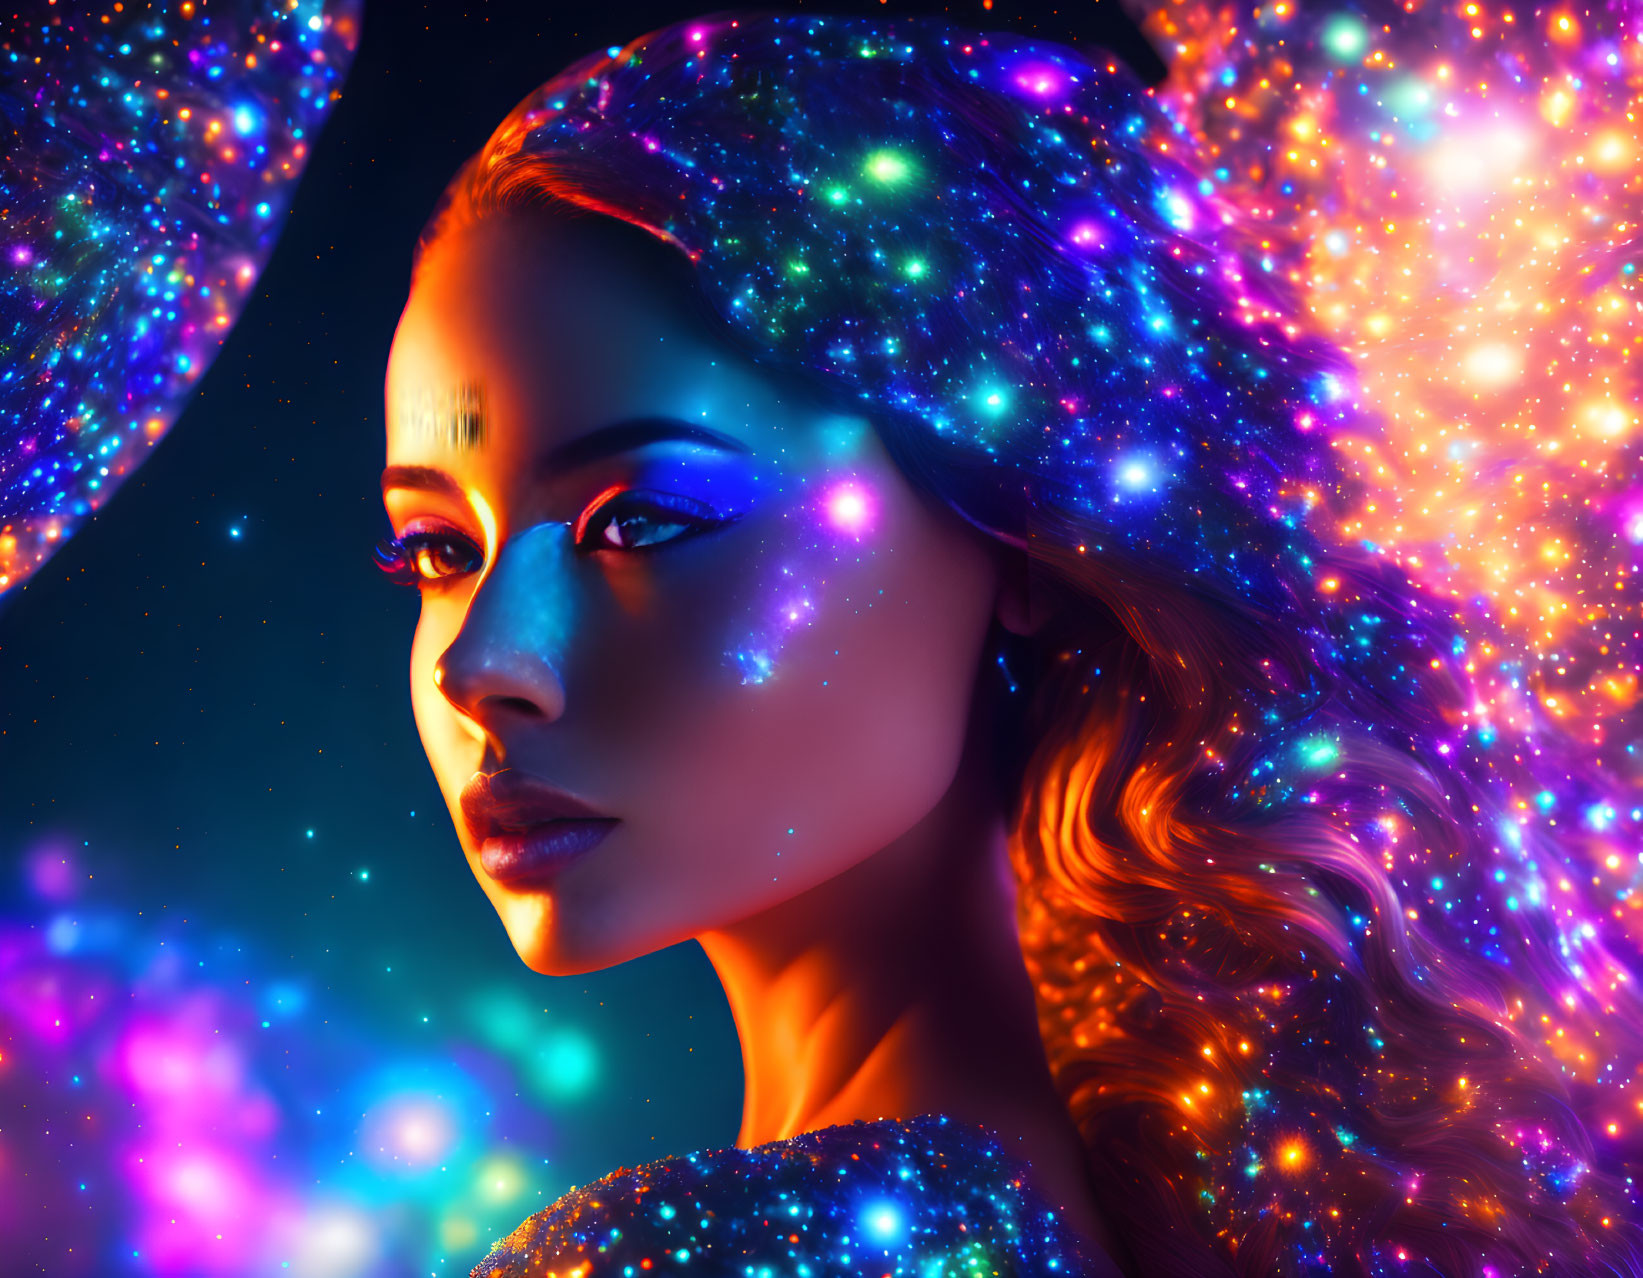 Cosmic-themed woman with galaxy makeup and starry lighting